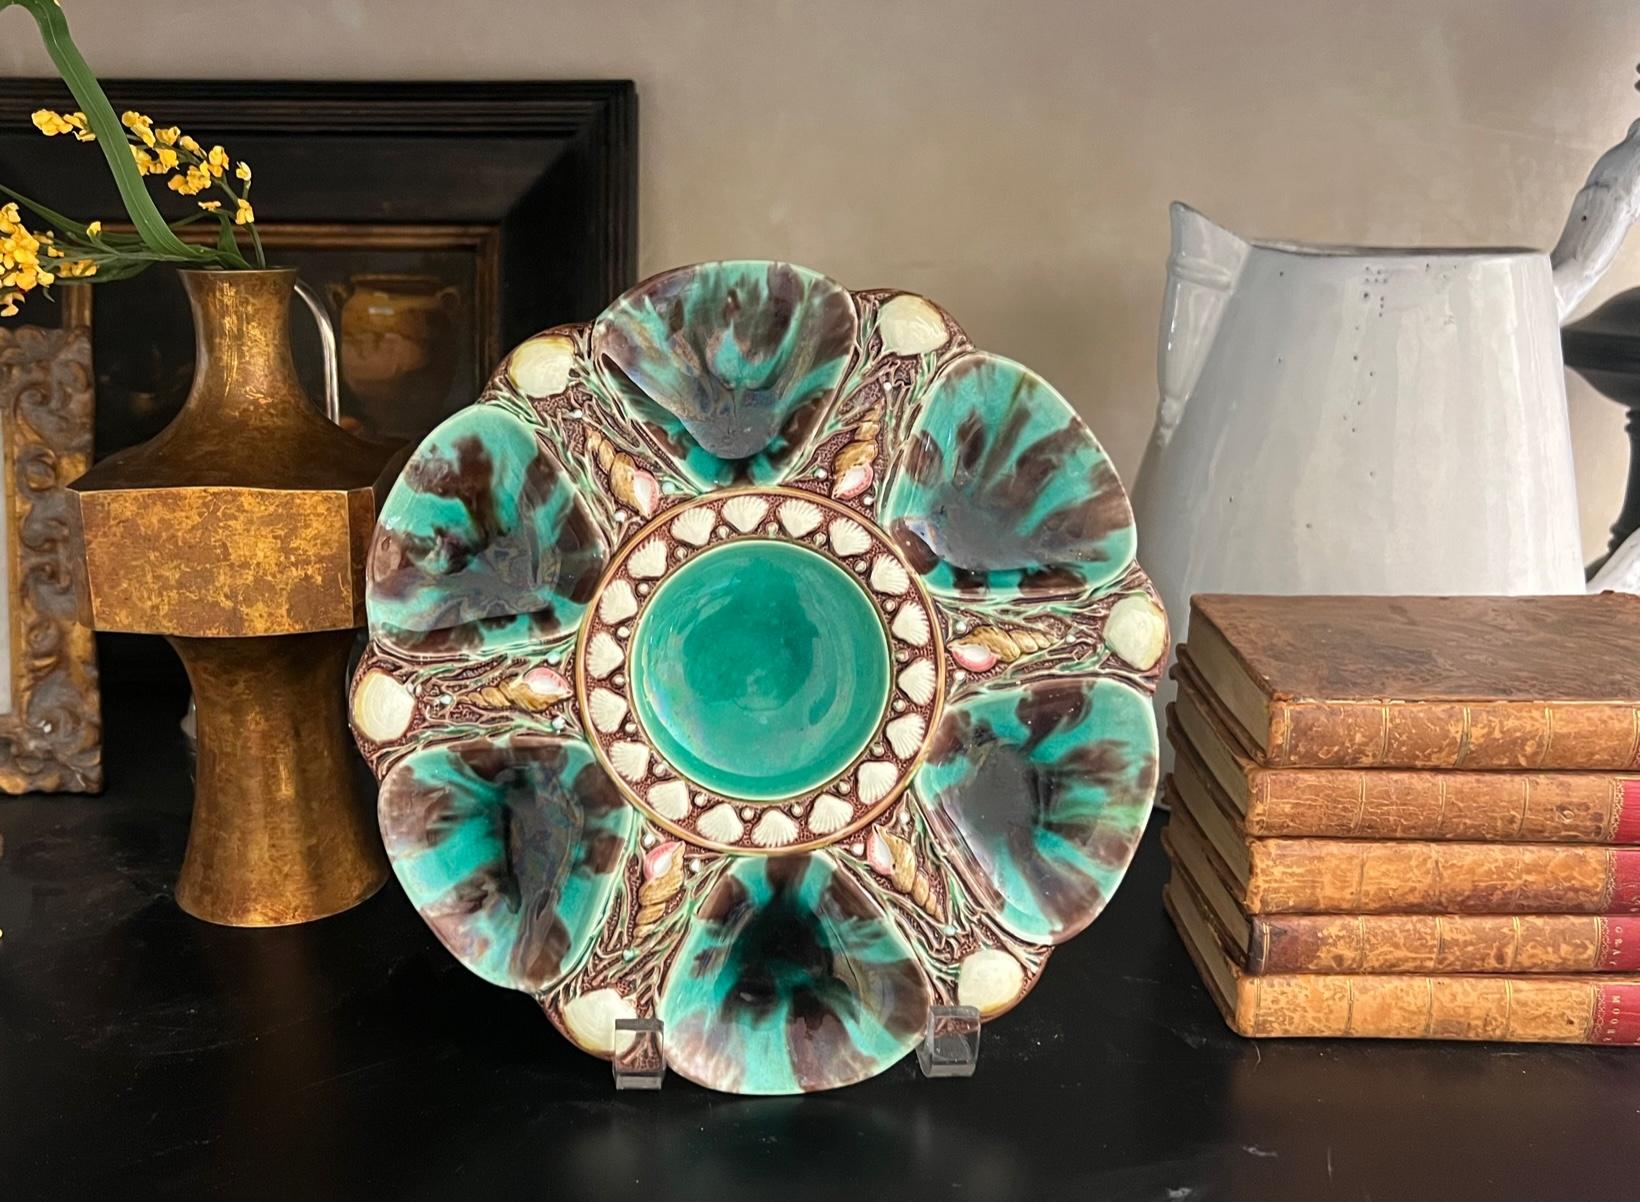 Antique Minton Green Majolica Oyster Plate, circa 1860's-1870's In Good Condition For Sale In Ross, CA